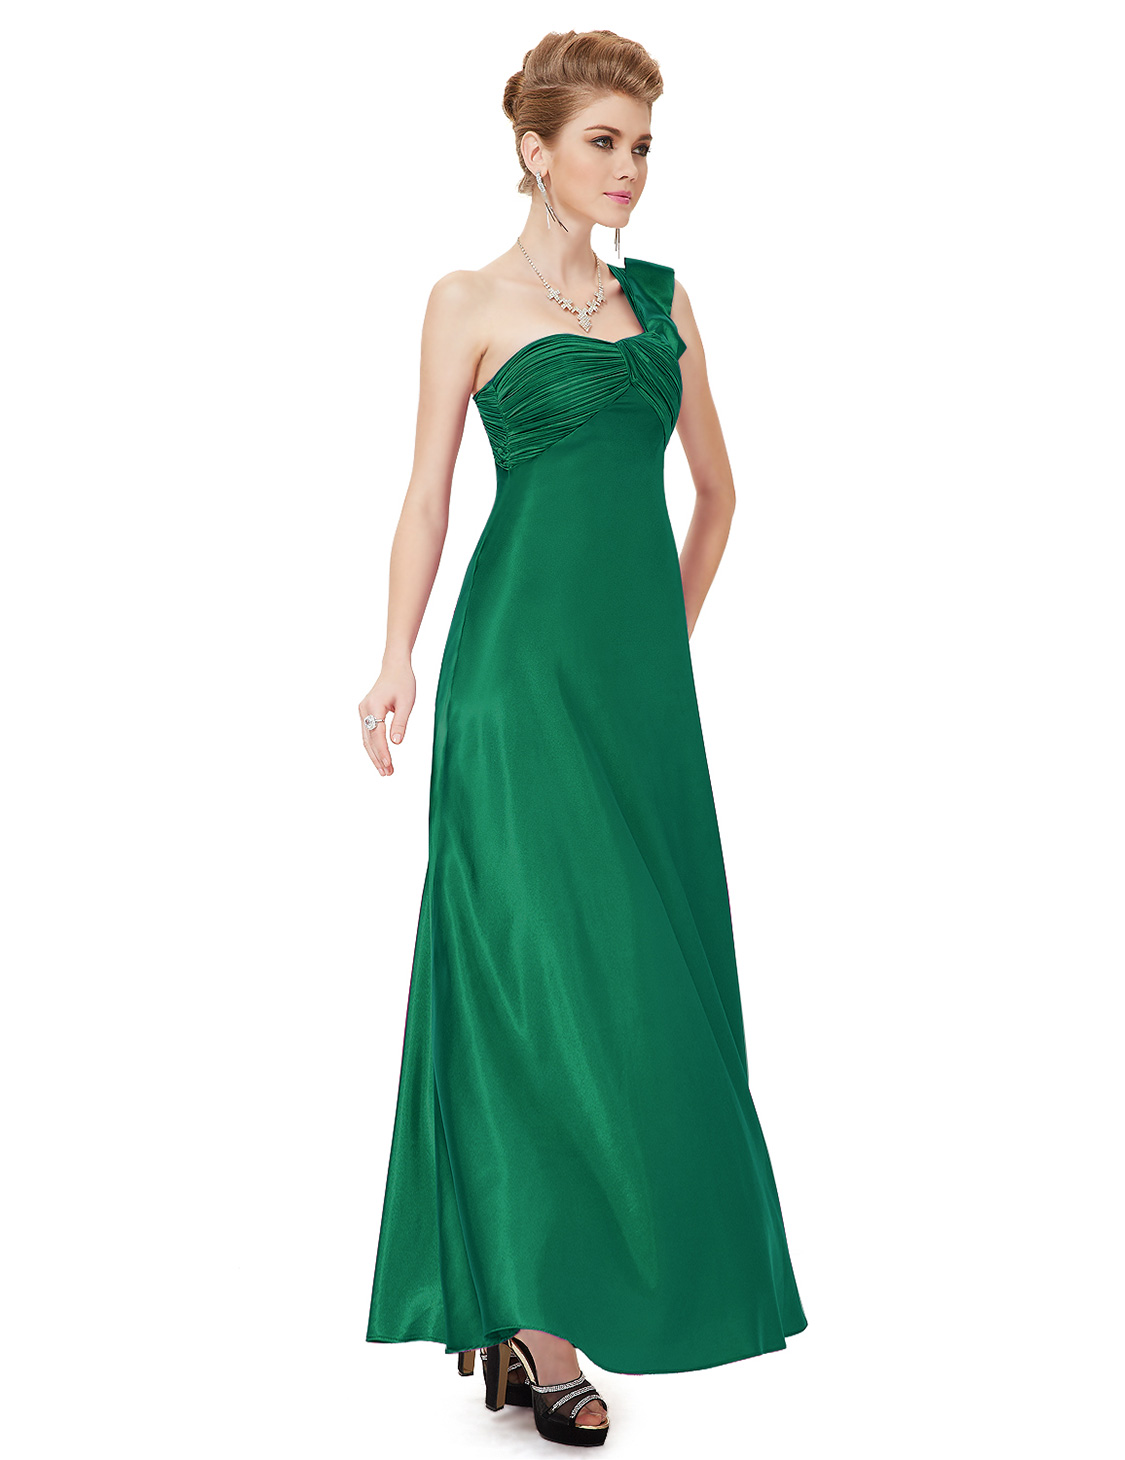 Unique One Shoulder Long Womens Evening Formal Bridesmaid Party Prom